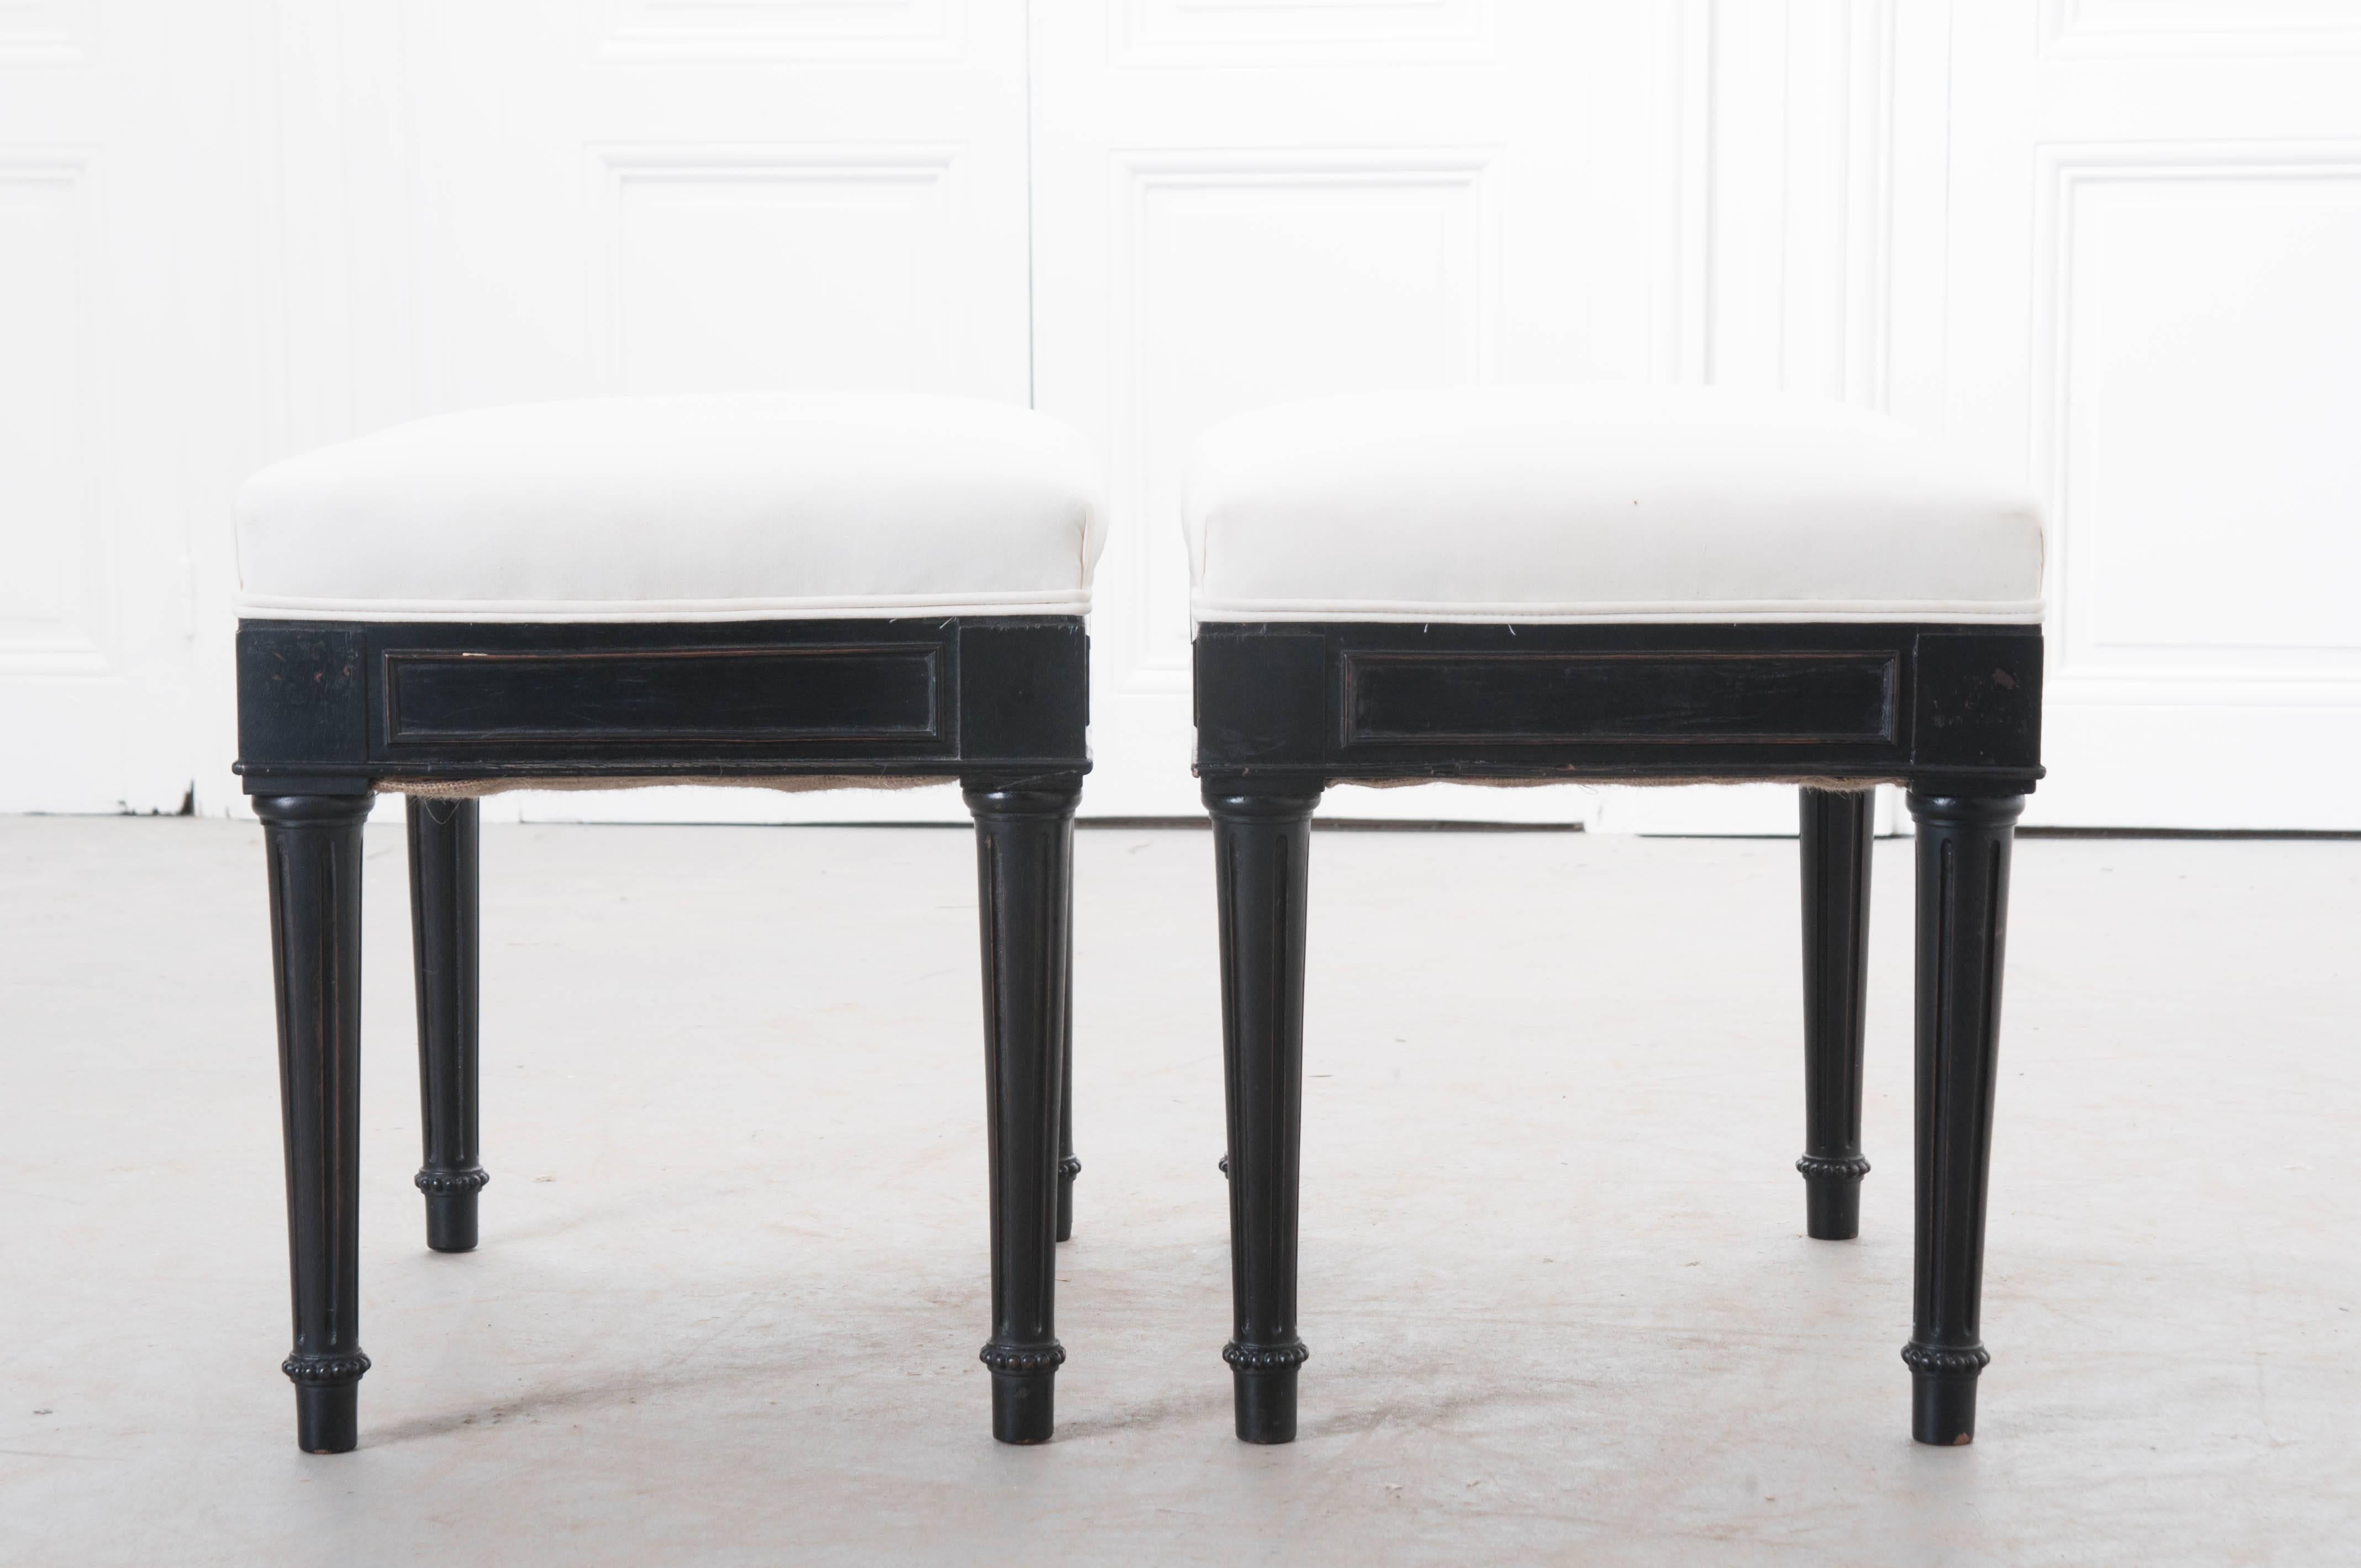 Two handsome ebony stools that have newly upholstered seats from early 20th century England. These beautiful antique stools' subdued design is tasteful and timeless, and the ebony finish has acquired a wonderful patina through the years. Each stool